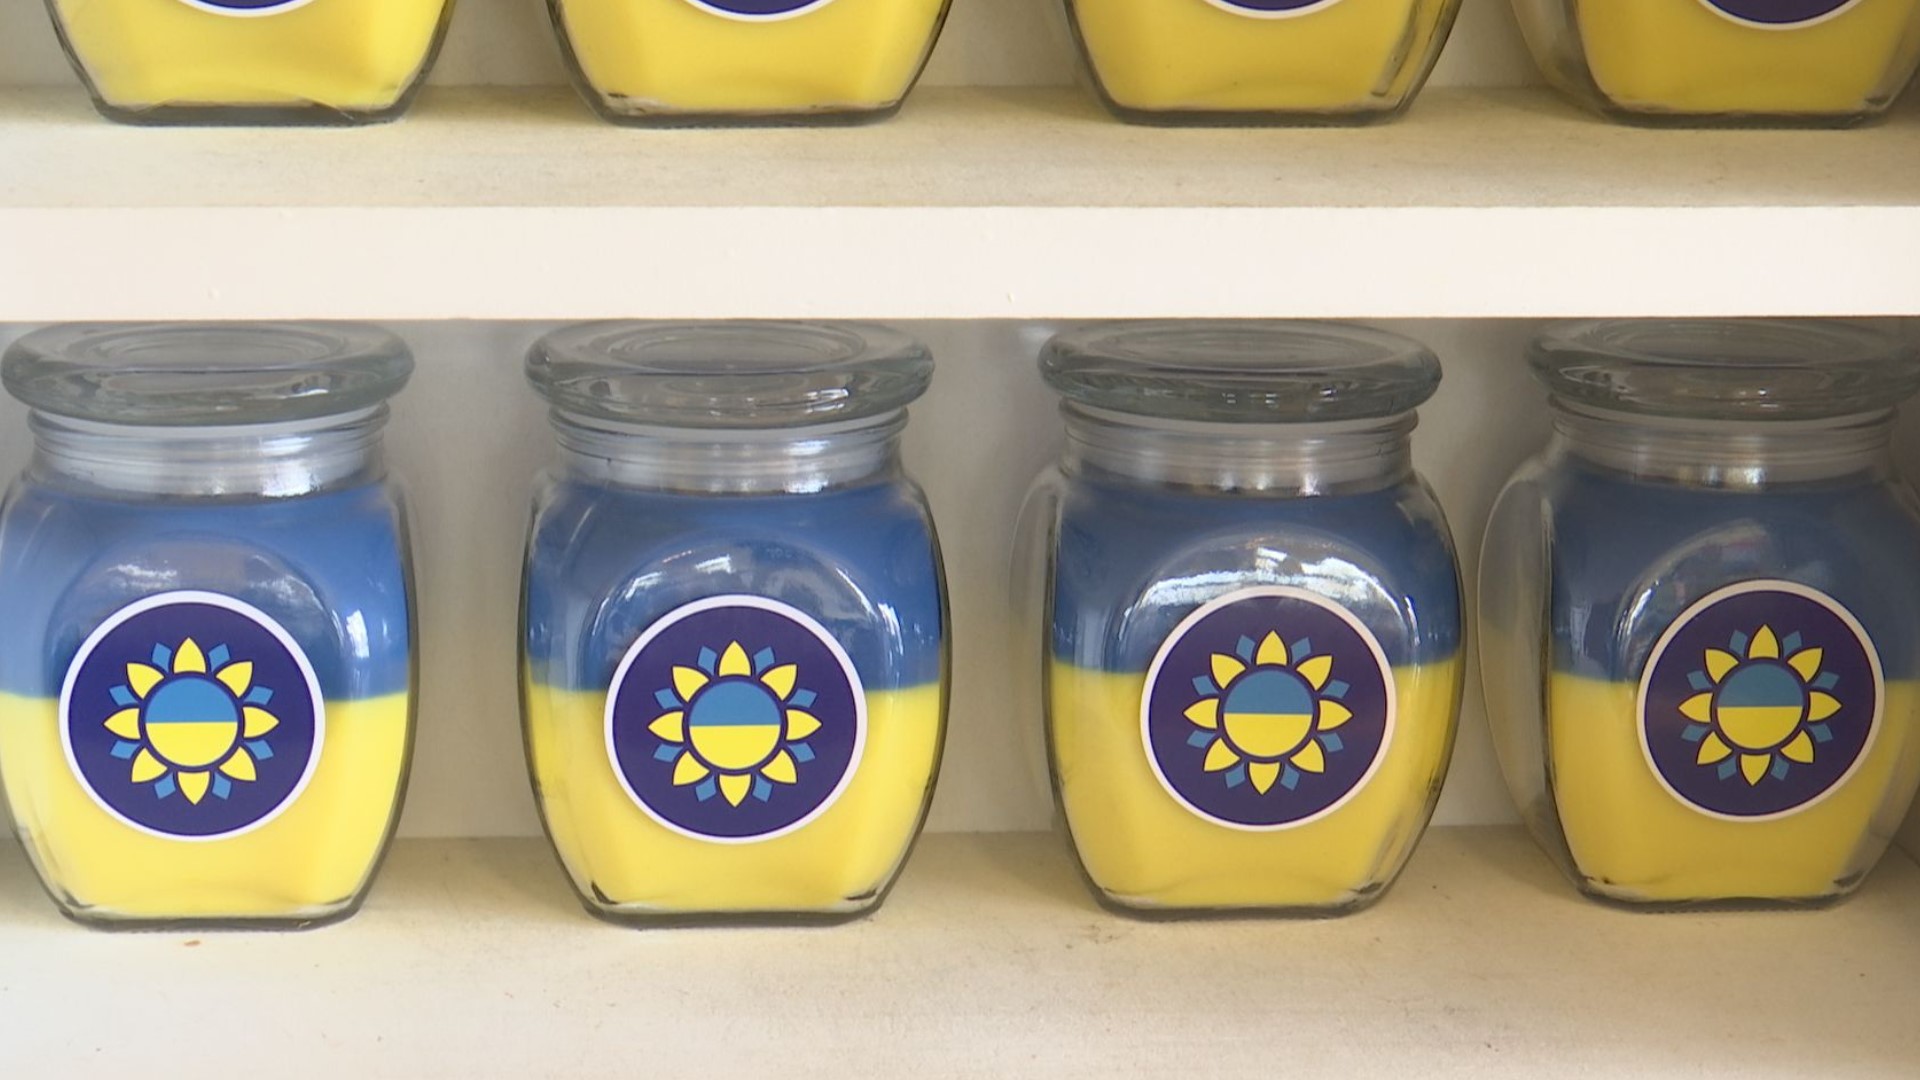 Dan and Tauria Catlin own Middle Davids Artisan Candles & Gifts. They regularly use the proceeds from their candle sales to help local groups with their fundraisers.